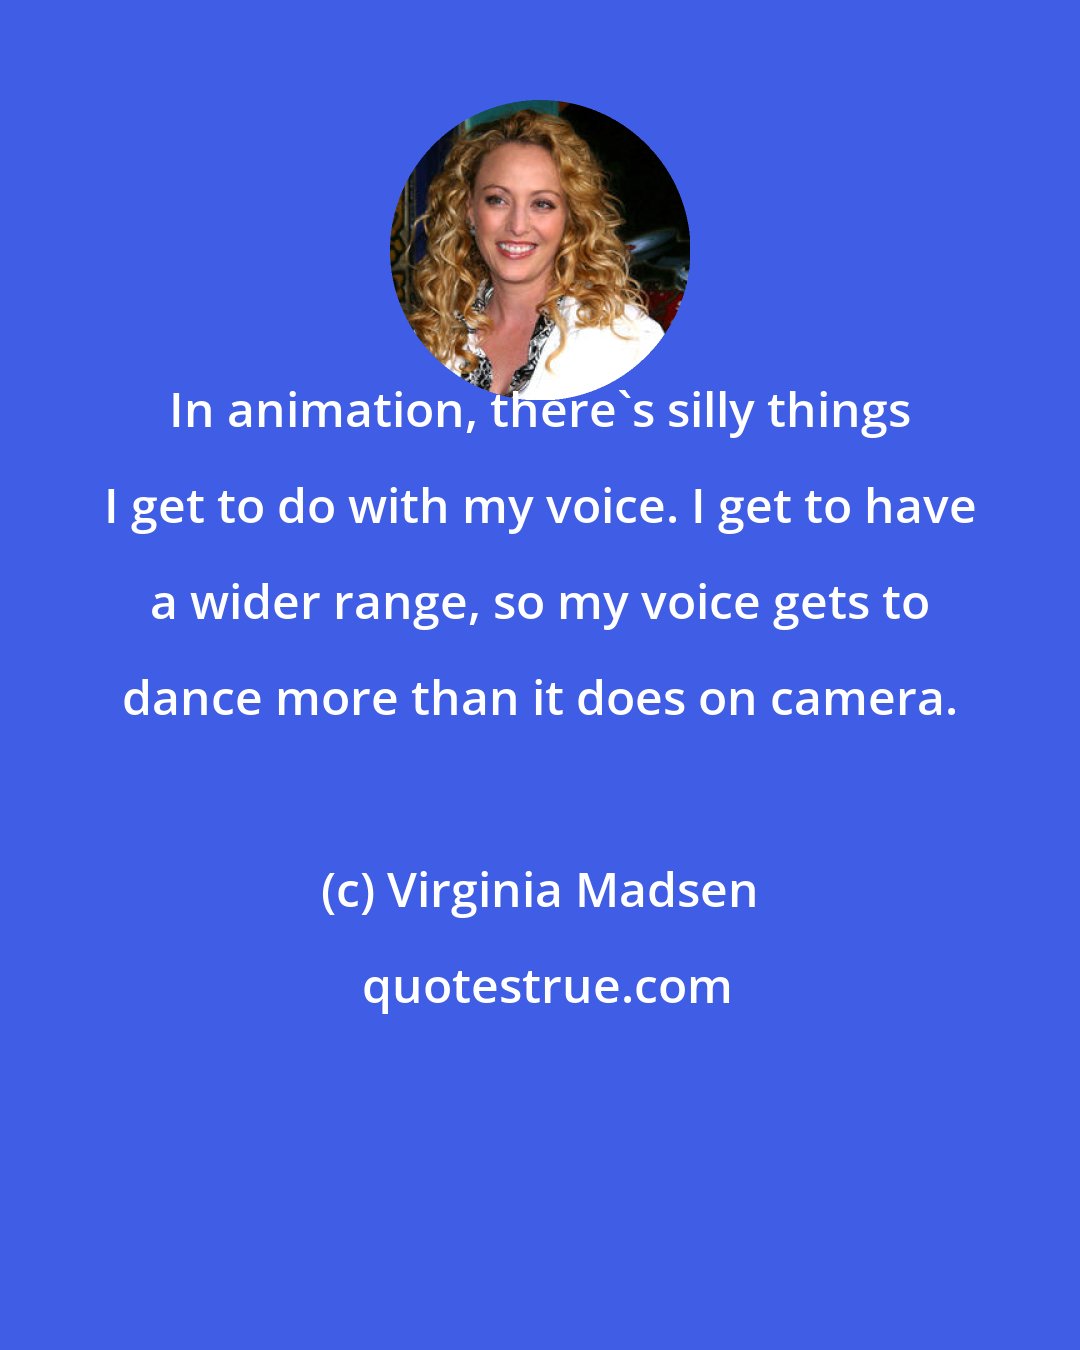 Virginia Madsen: In animation, there's silly things I get to do with my voice. I get to have a wider range, so my voice gets to dance more than it does on camera.